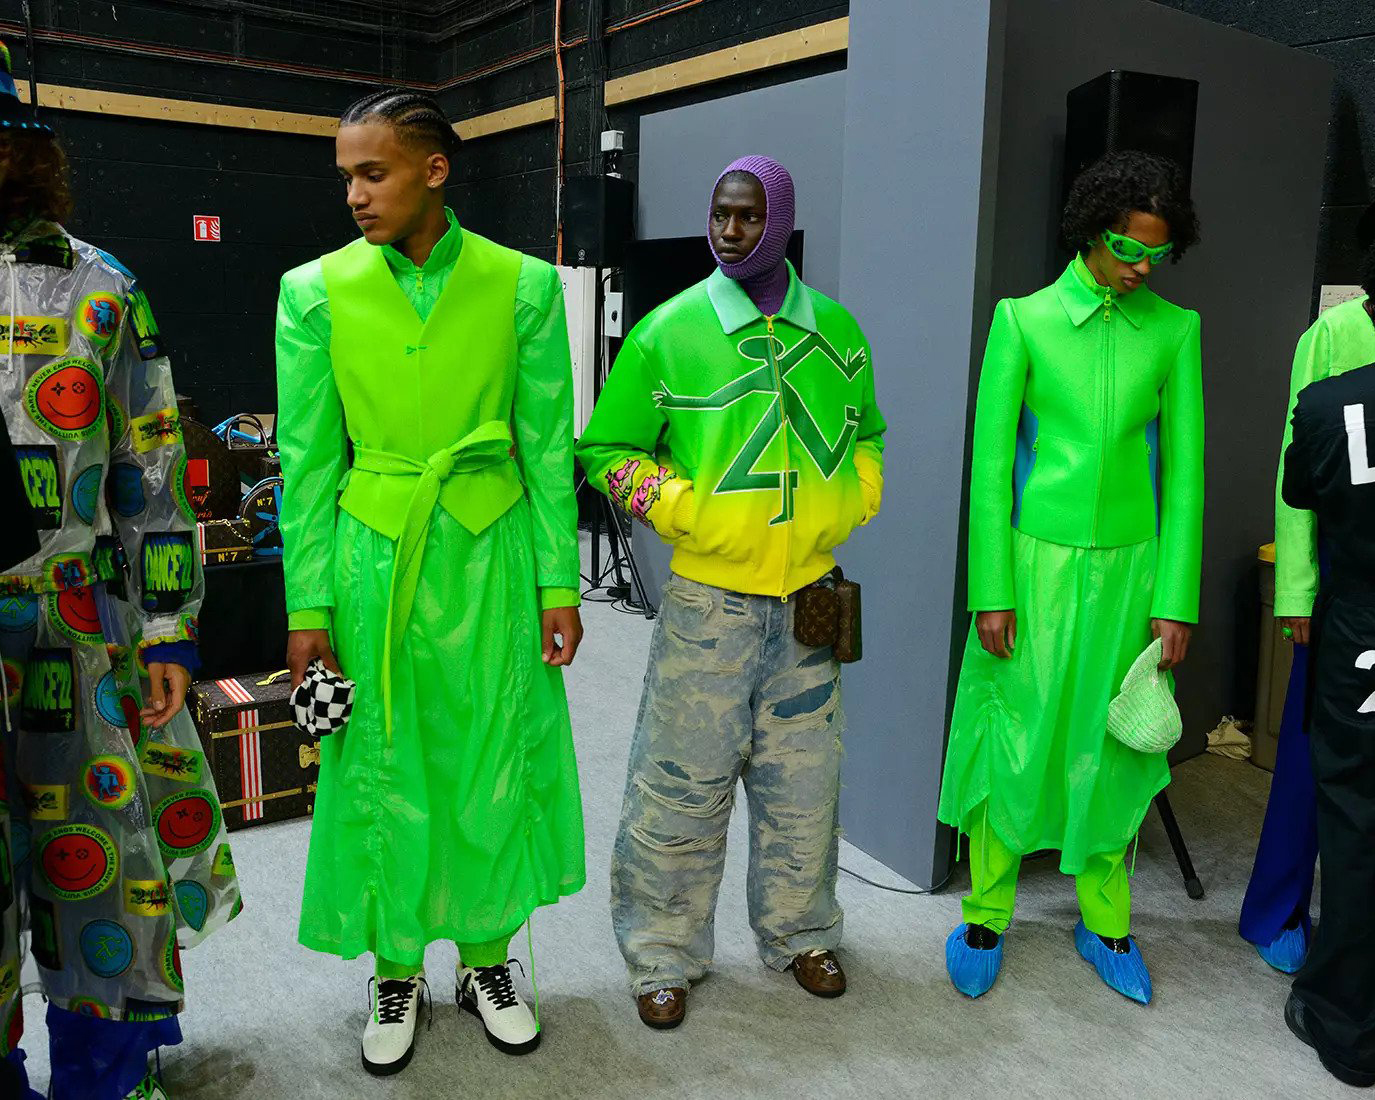 Models at Louis Vuitton wearing bright neon green